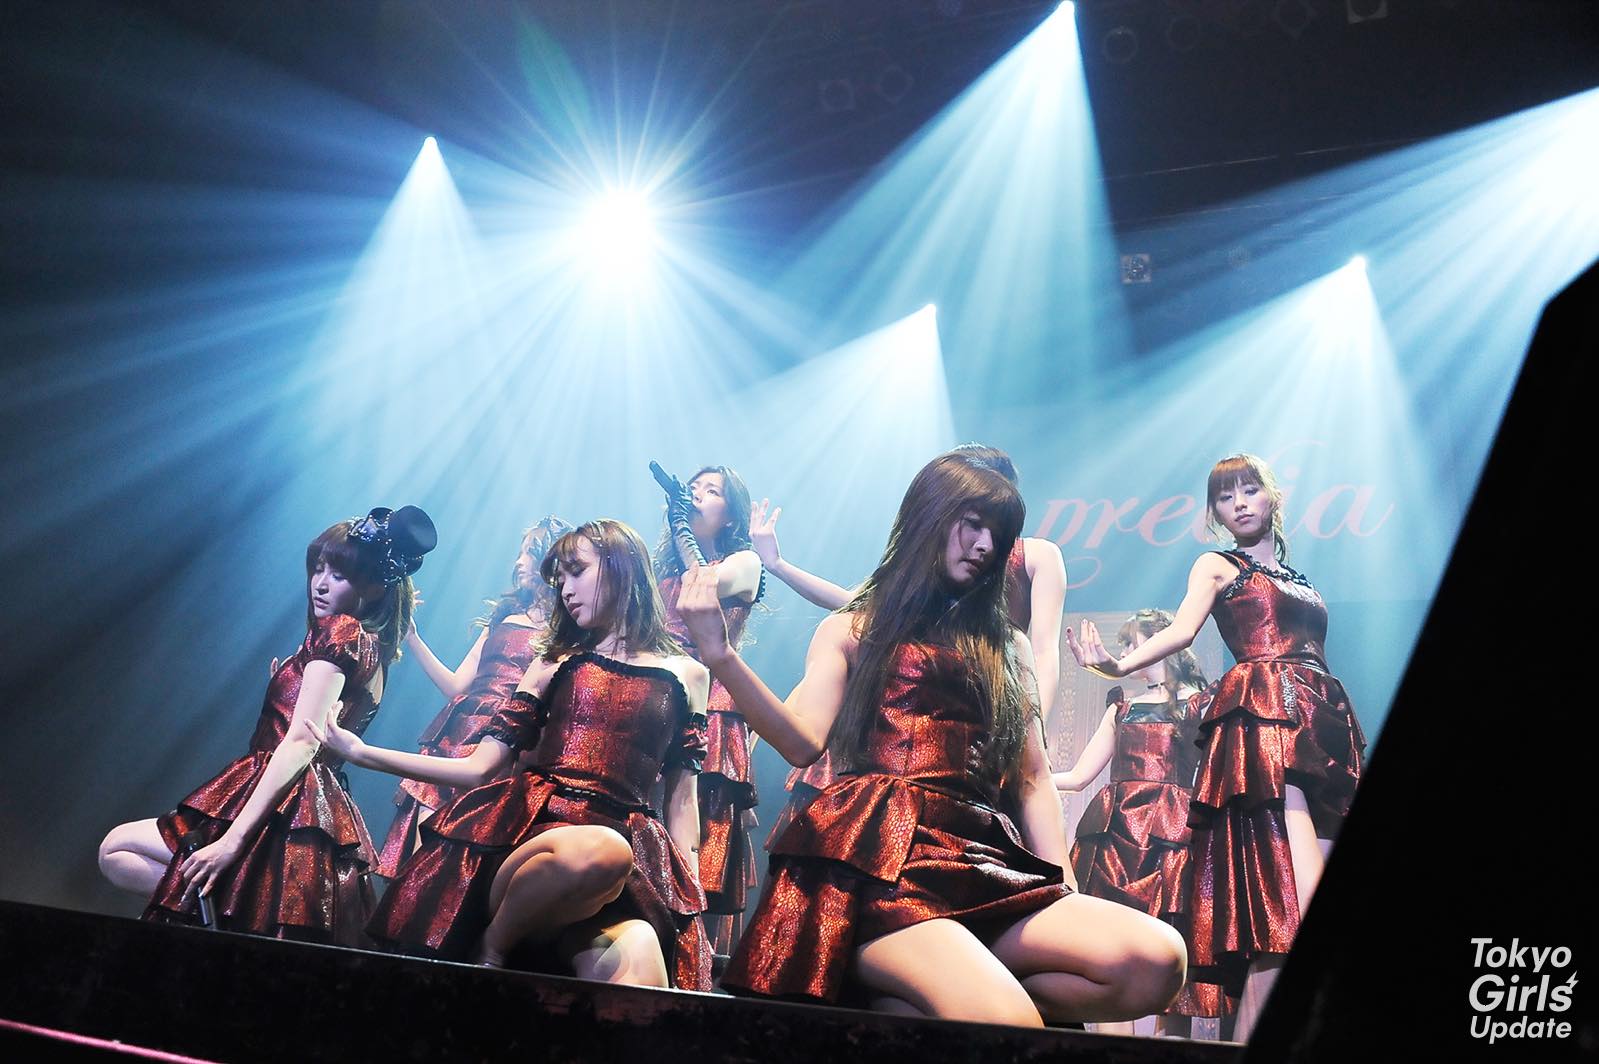 Adult Idols predia Celebrate Their 5th Anniversary With a Year-End Party at Zepp Tokyo!